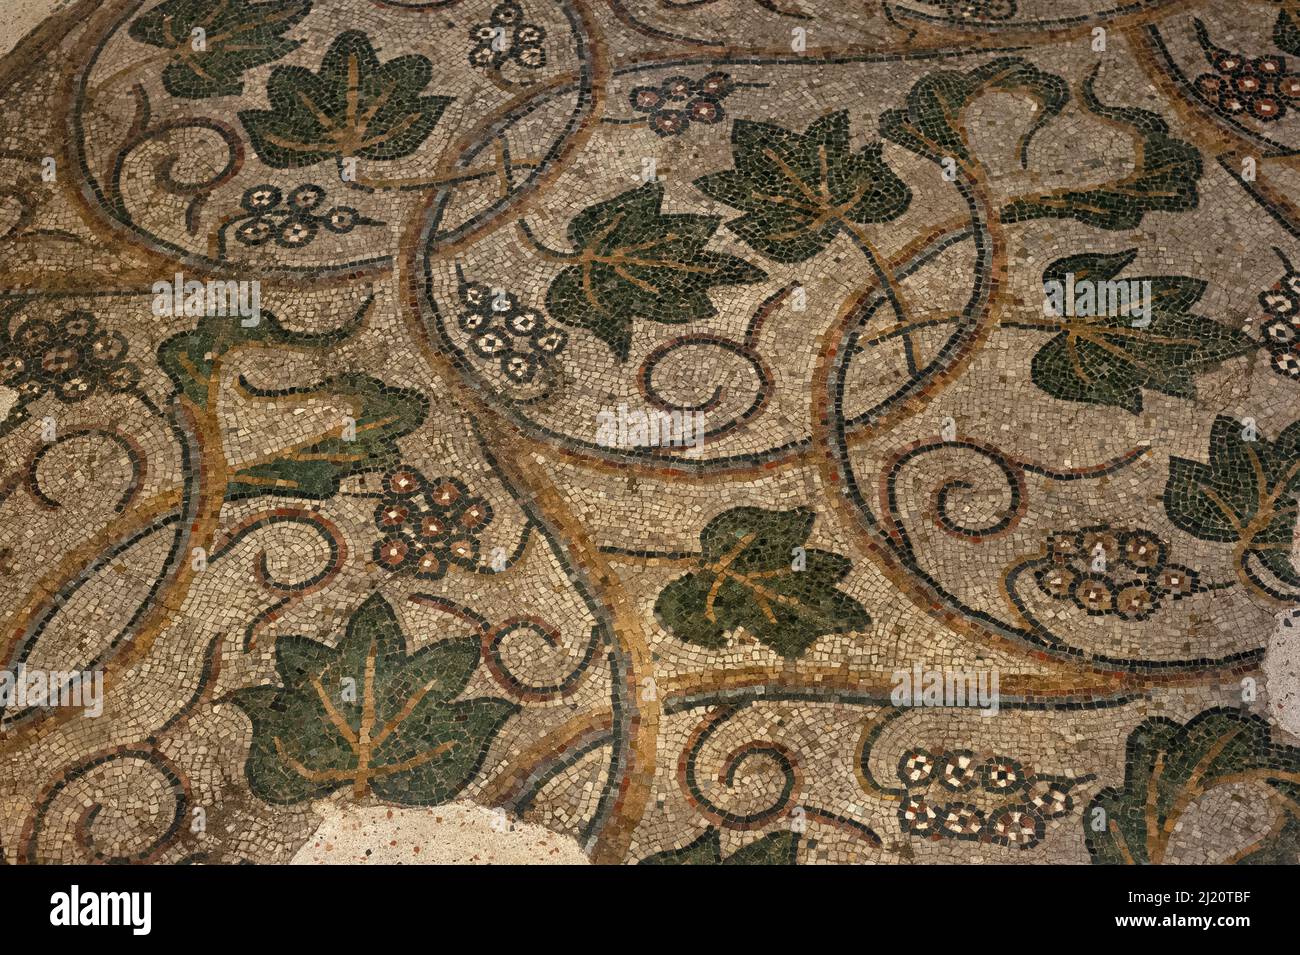 Bunches of grapes and broad green leaves amid the curving shoots and tendrils of a vine.  Detail of medieval mosaic in restored late-1000s or early 1100s pavement in former Benedictine abbey church at Sorde l'Abbaye, Landes, Nouvelle-Aquitaine, France. Stock Photo